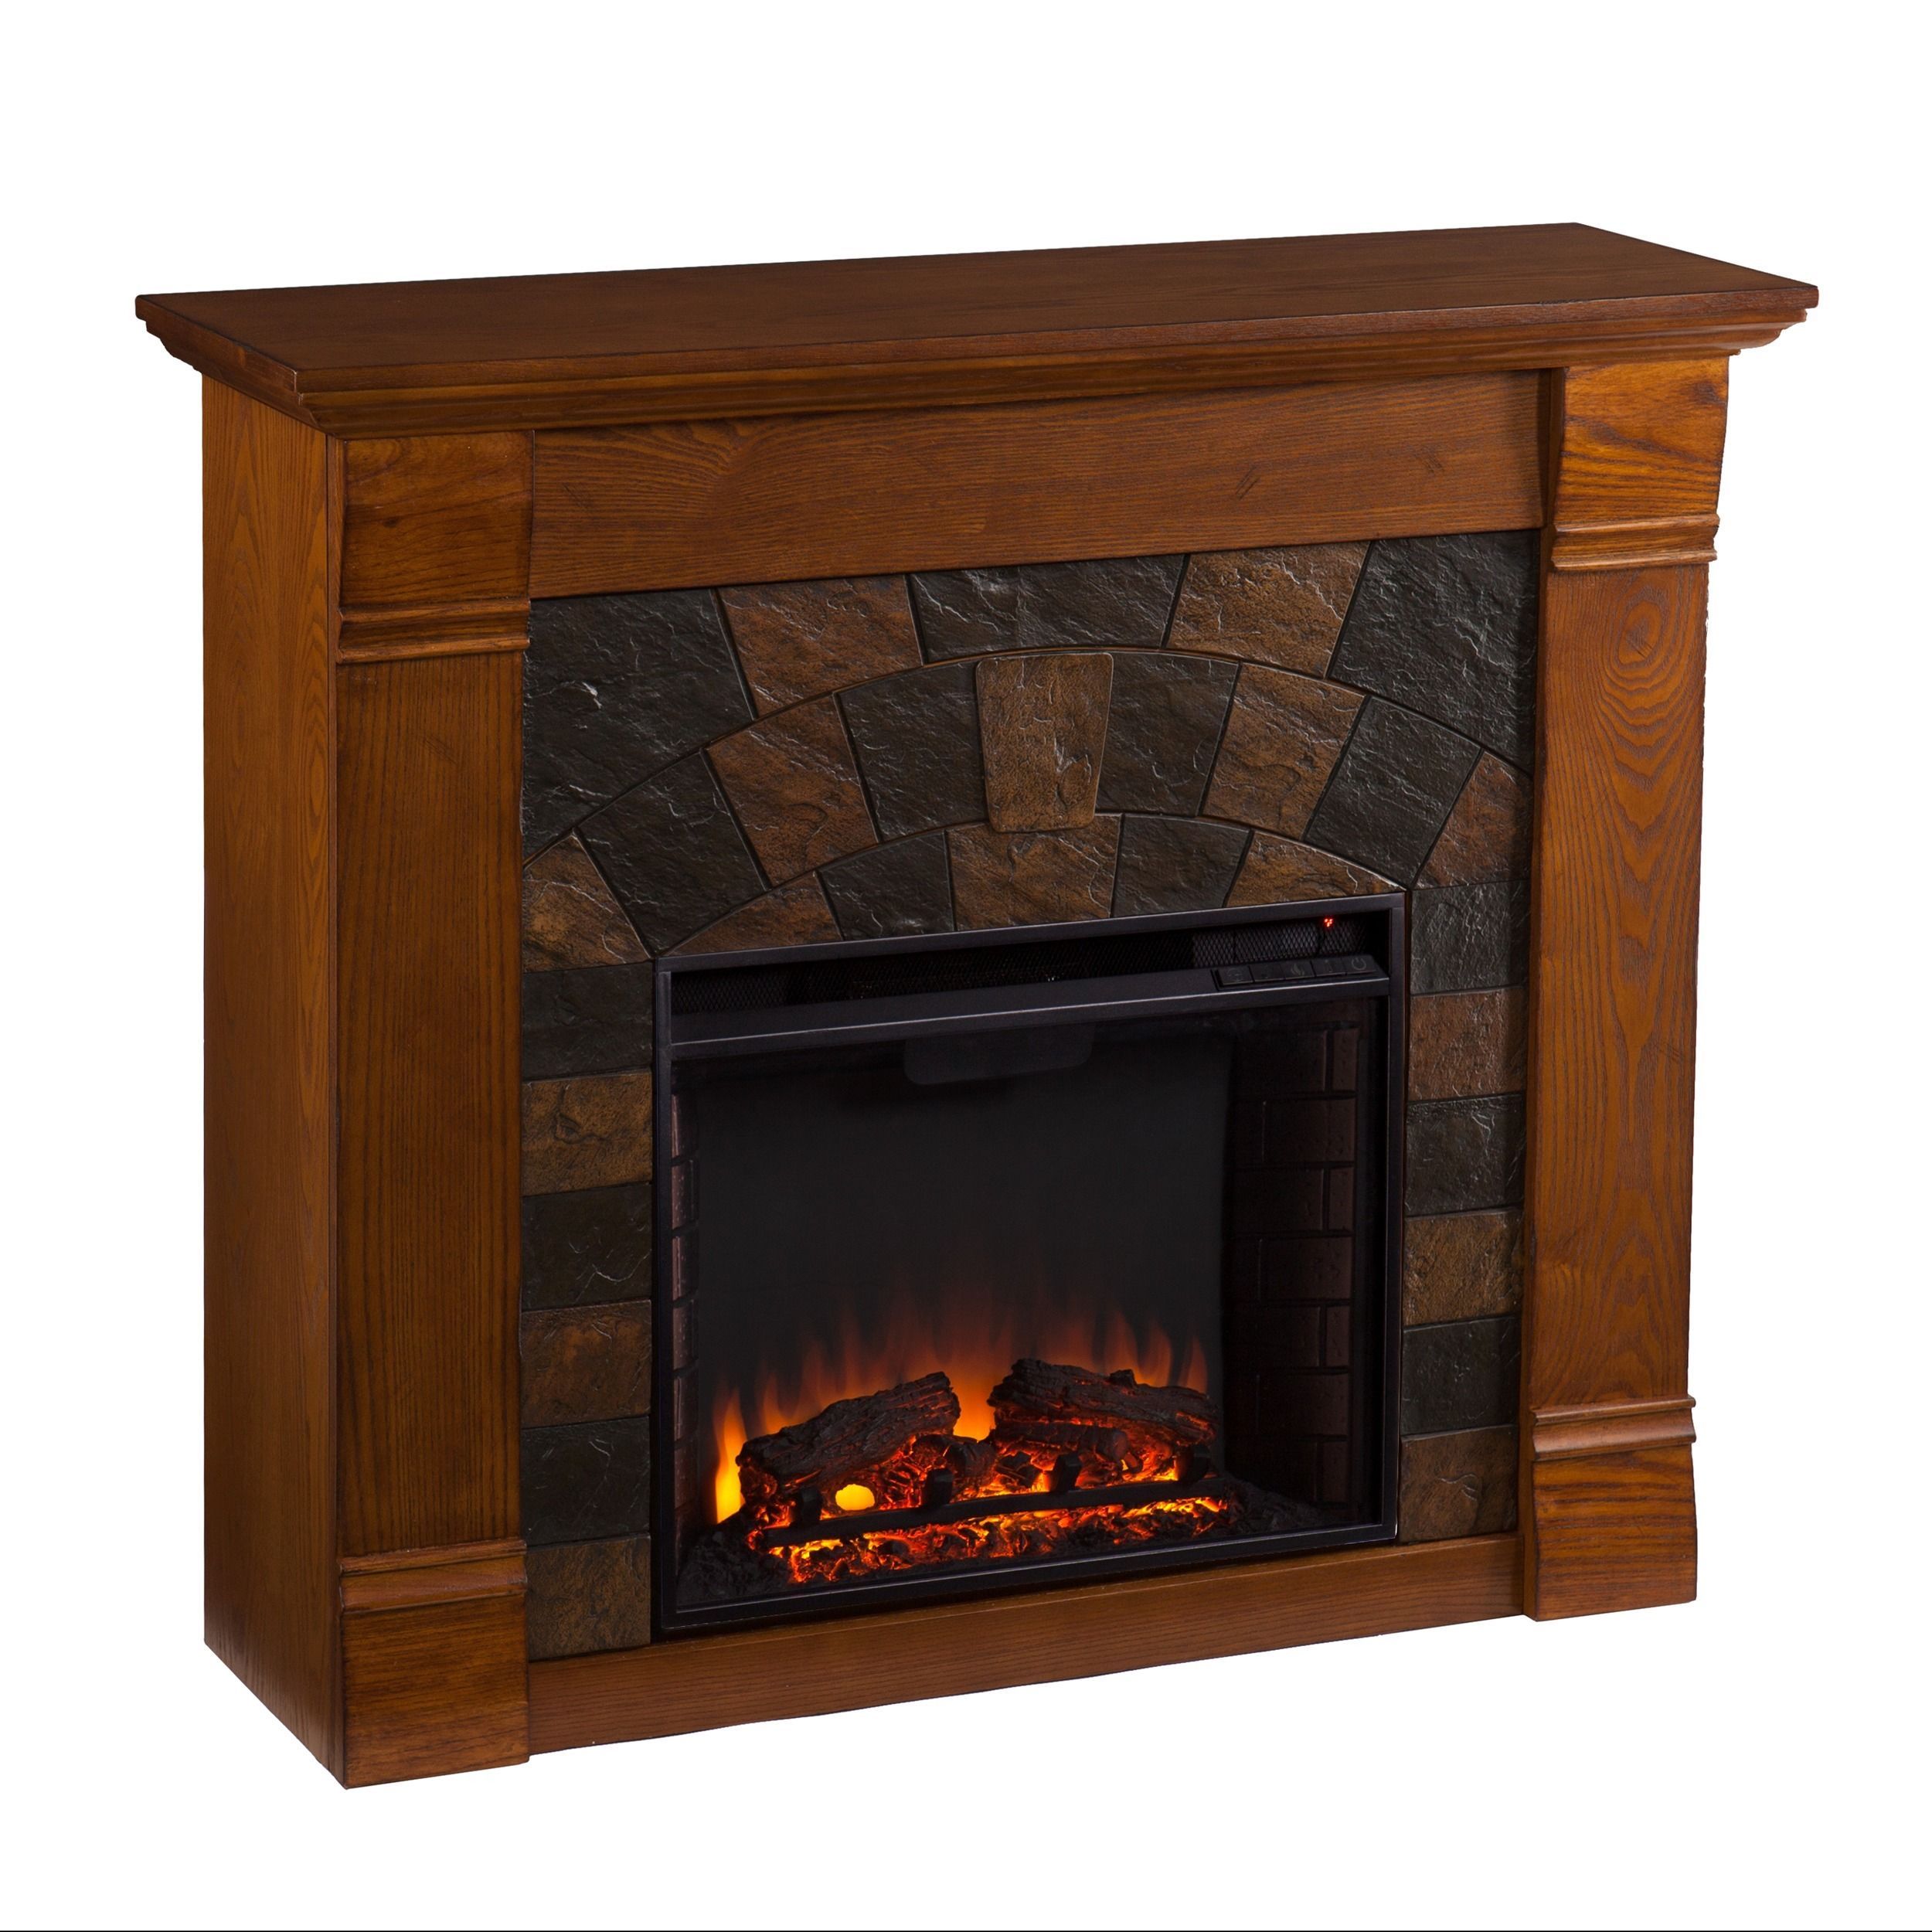 Ivory Electric Fireplace Awesome Pine Canopy Harper Blvd Stonegate Antique Oak Brown